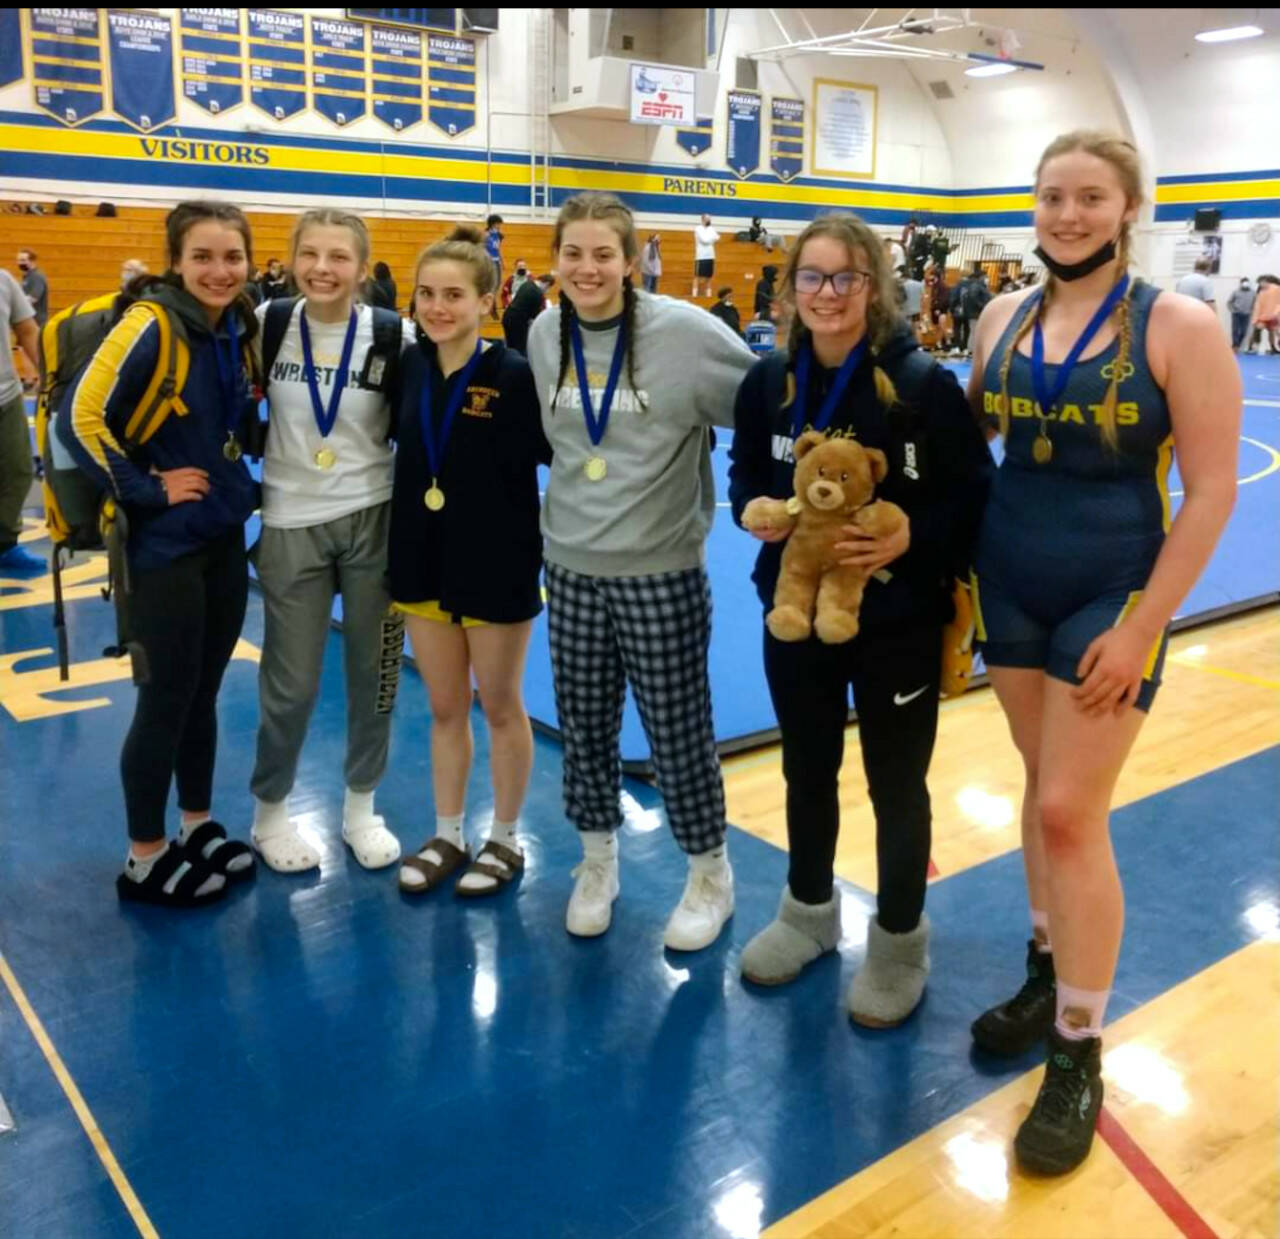 SUBMITTED PHOTO Aberdeen had six individual champions to take the team title at the Lads and Lasses Tournament on Saturday at Fife High School. Aberdeen’s title winner are (from left): Hailey Wilson (125), Emmersyn Yakovich (110), Madelynn Machowek (105), Raegan Portmann (145), Felicia Bell (130) and Katie Gakin (190).